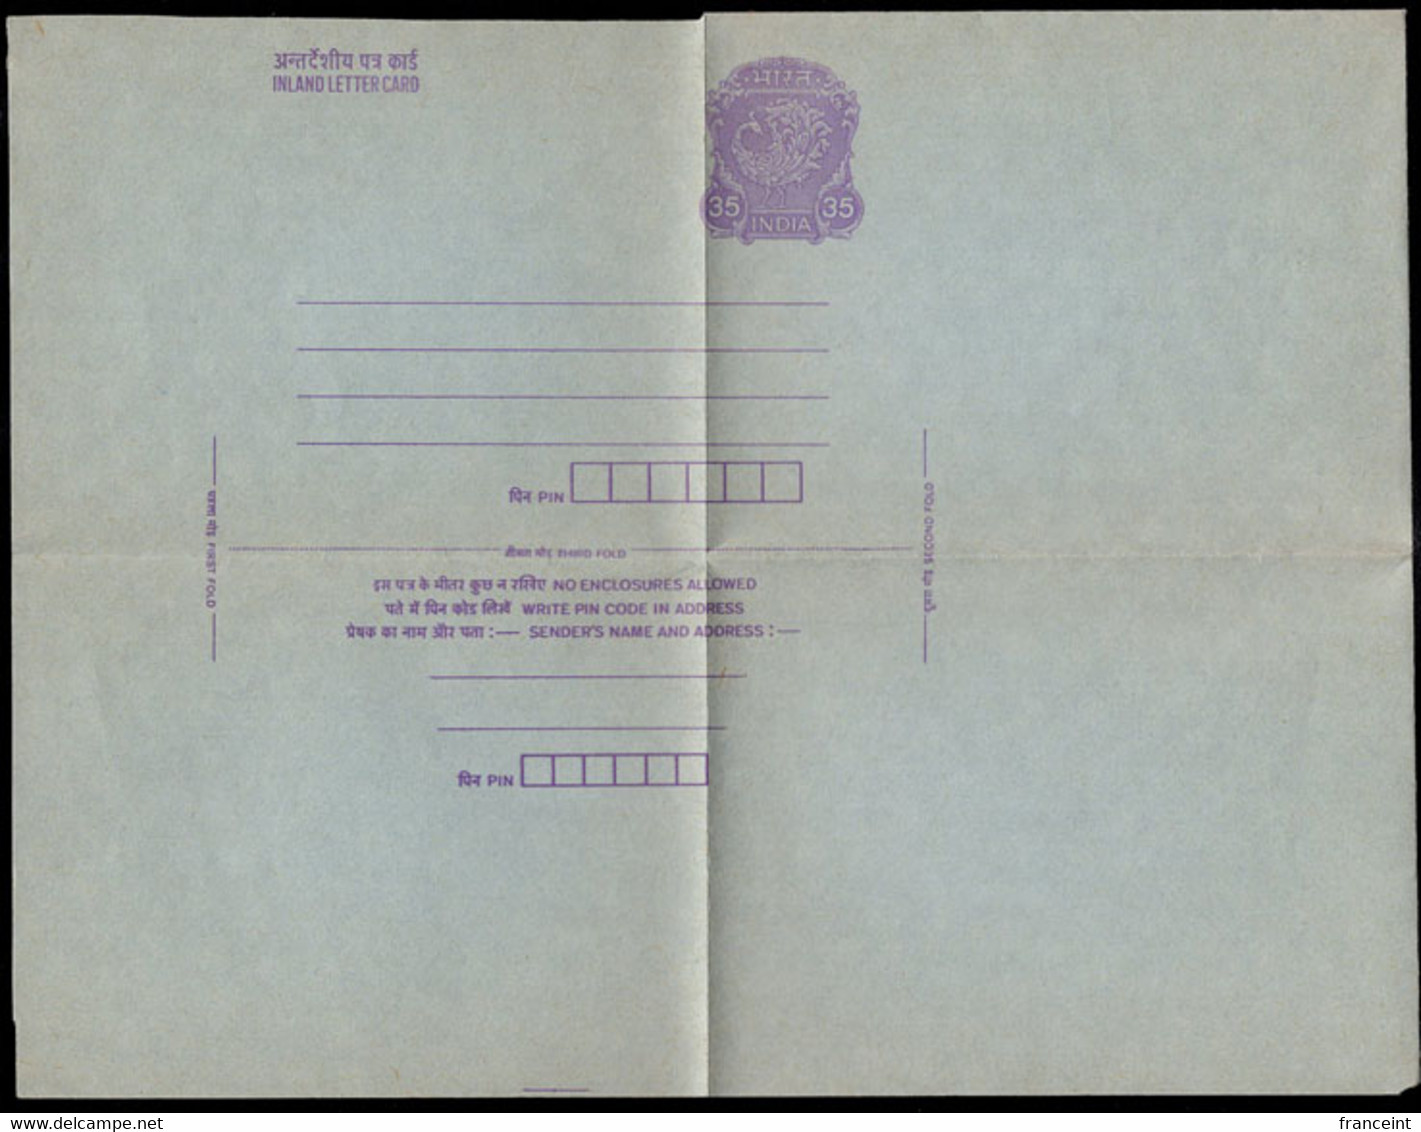 INDIA 35p Lettersheet Misprinted - Major Shift. - Inland Letter Cards